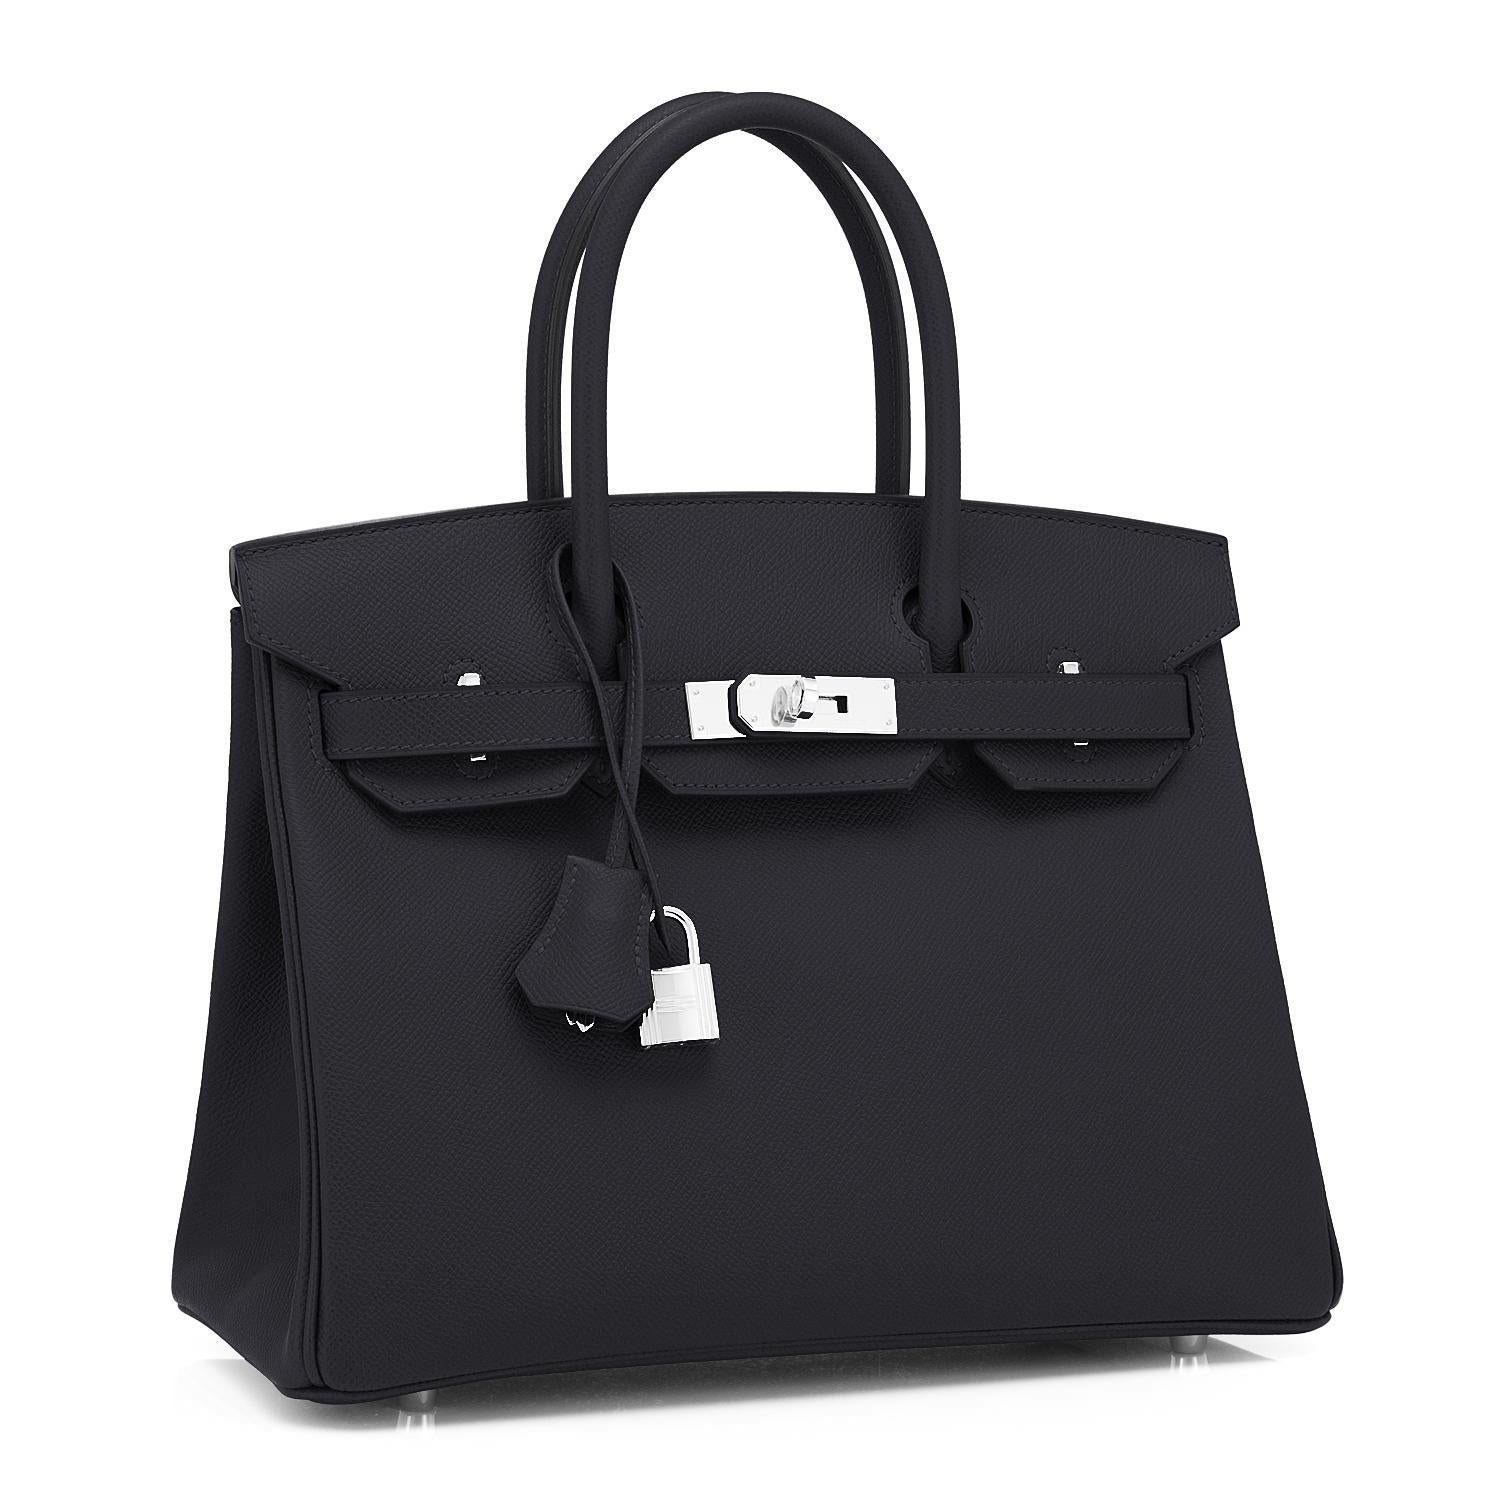 Hermes Black 30cm Birkin Epsom Gold Hardware Bag Y Stamp, 2020
Just purchased from Hermes store; bag bears new interior Y 2020 Stamp.
Brand New in Box. Store fresh.  Pristine Condition (with plastic on hardware)
Perfect gift! Comes with keys, lock,